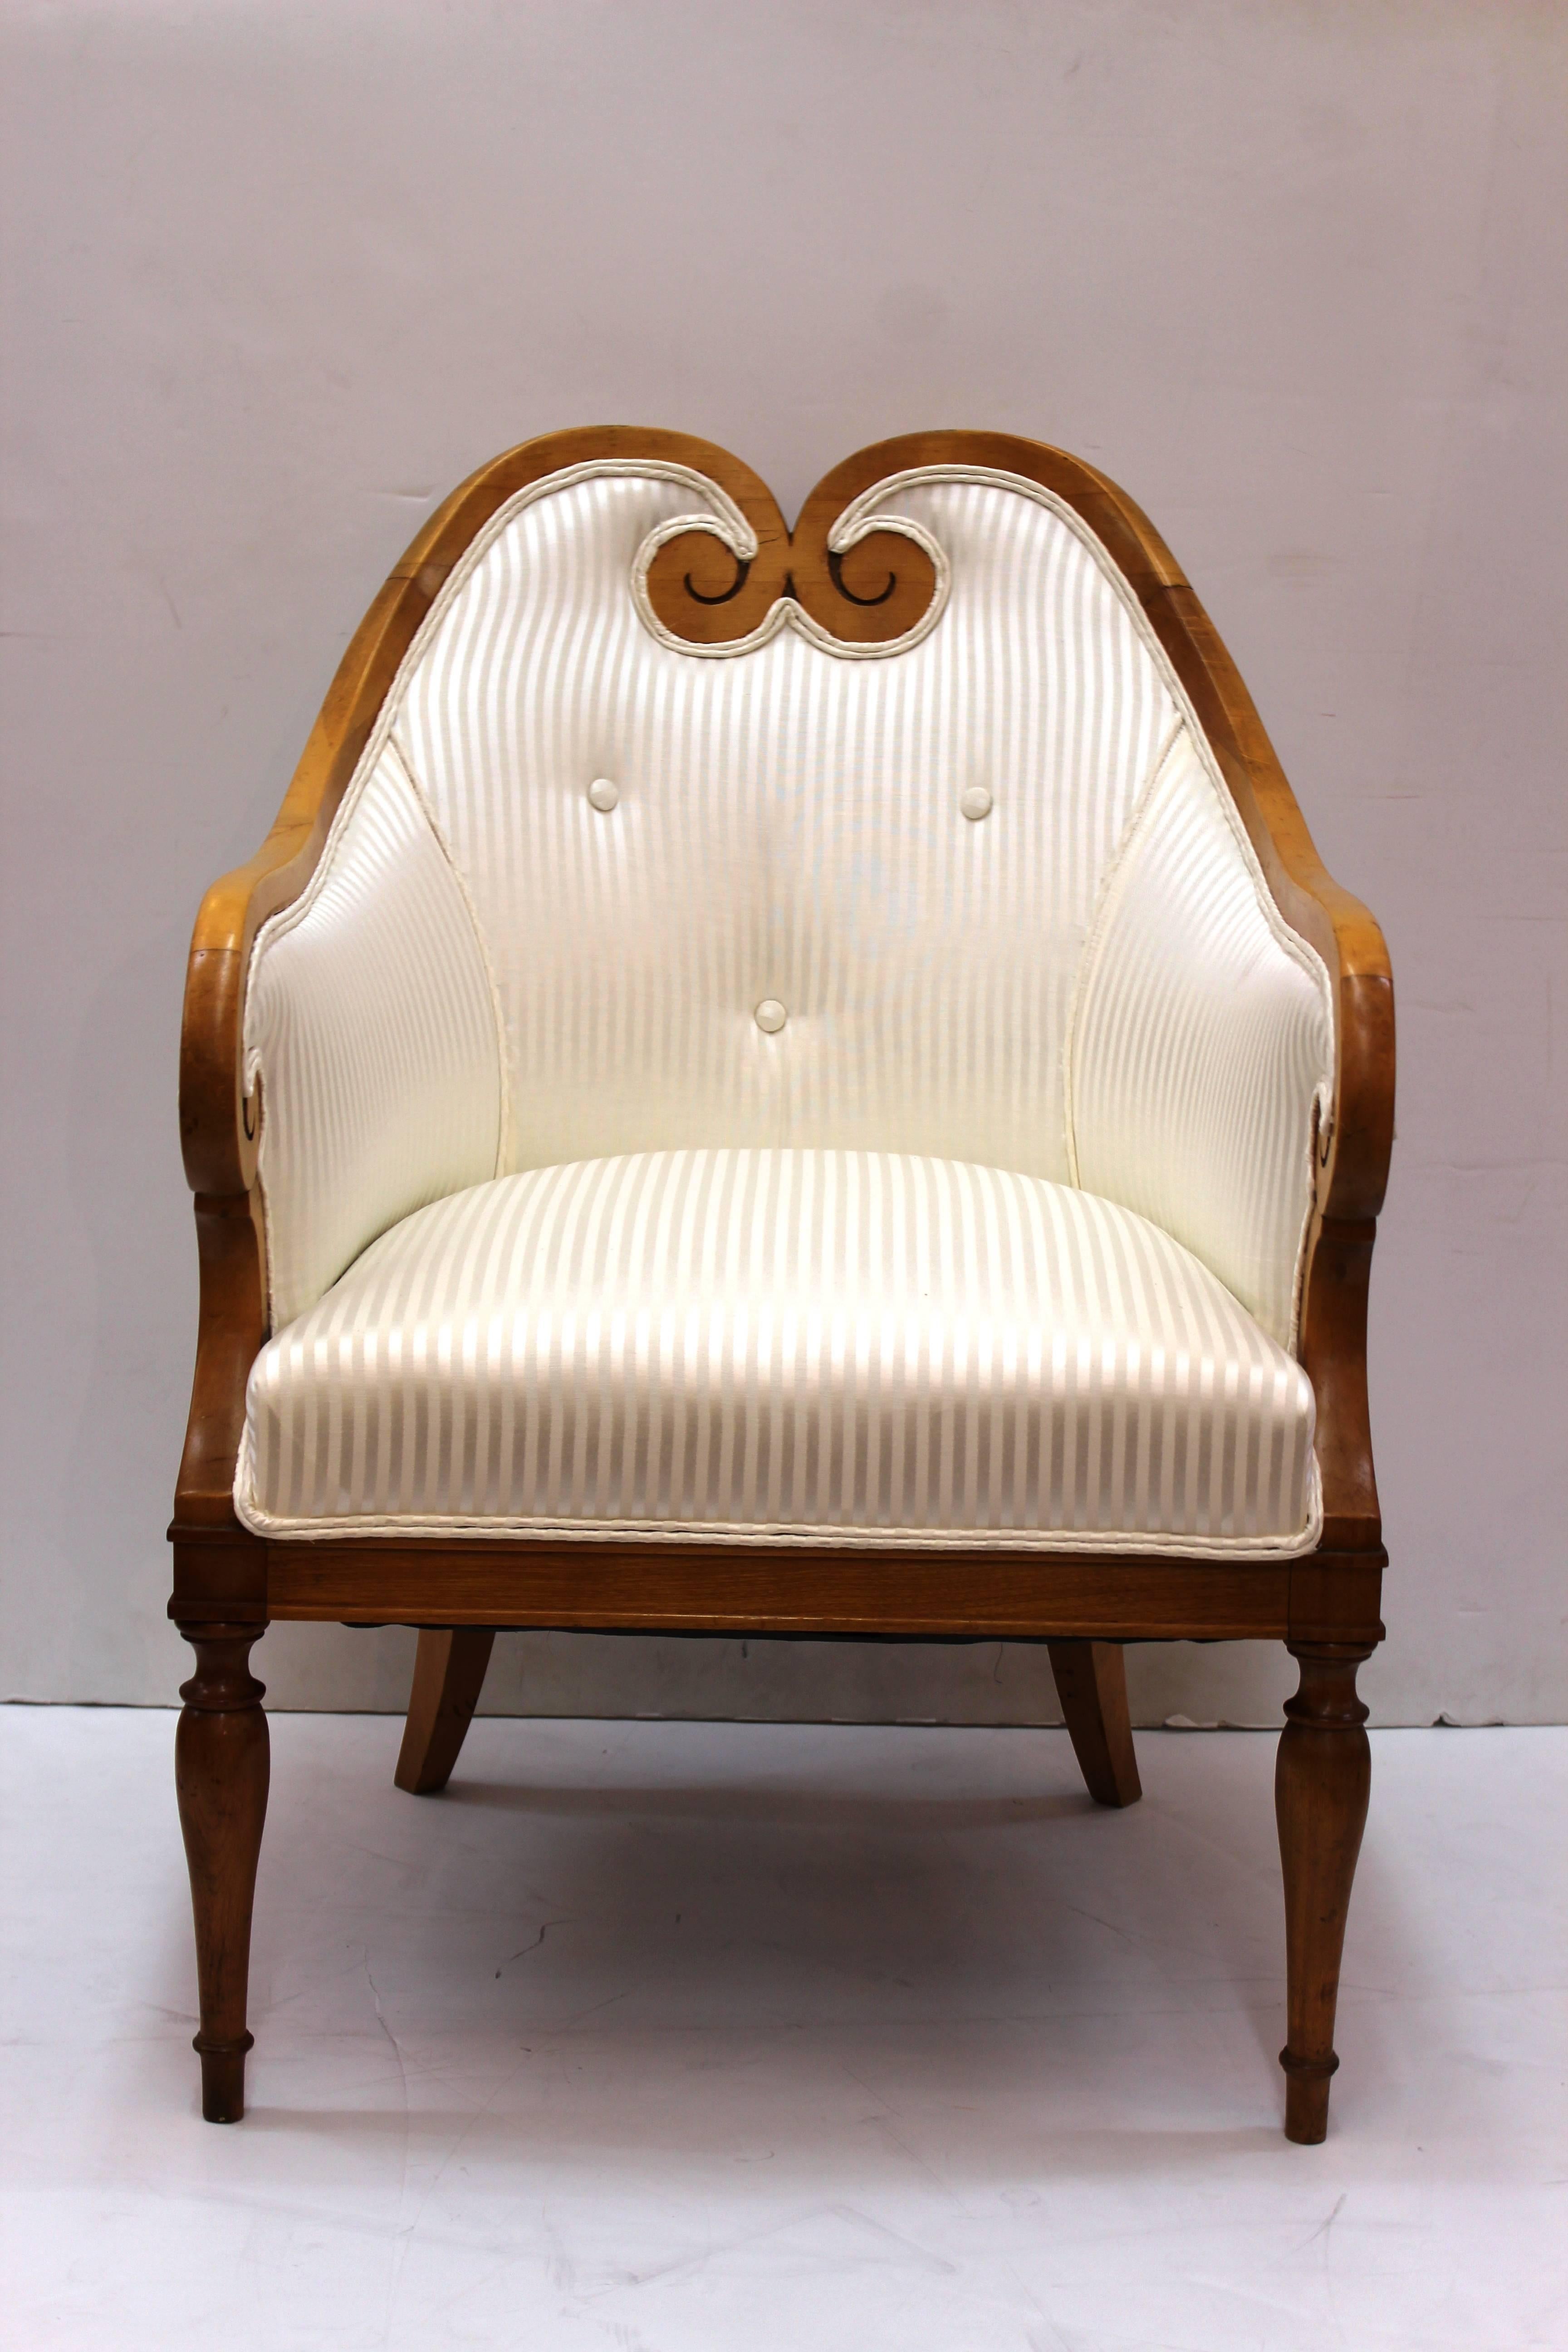 Biedermeier occasional chairs dating from the 19th century. Details include blond wood frame with sweet heart back and curled arms. The chairs stand on one pair of baluster legs with curved back legs. Newly reupholstered in white tone on tone